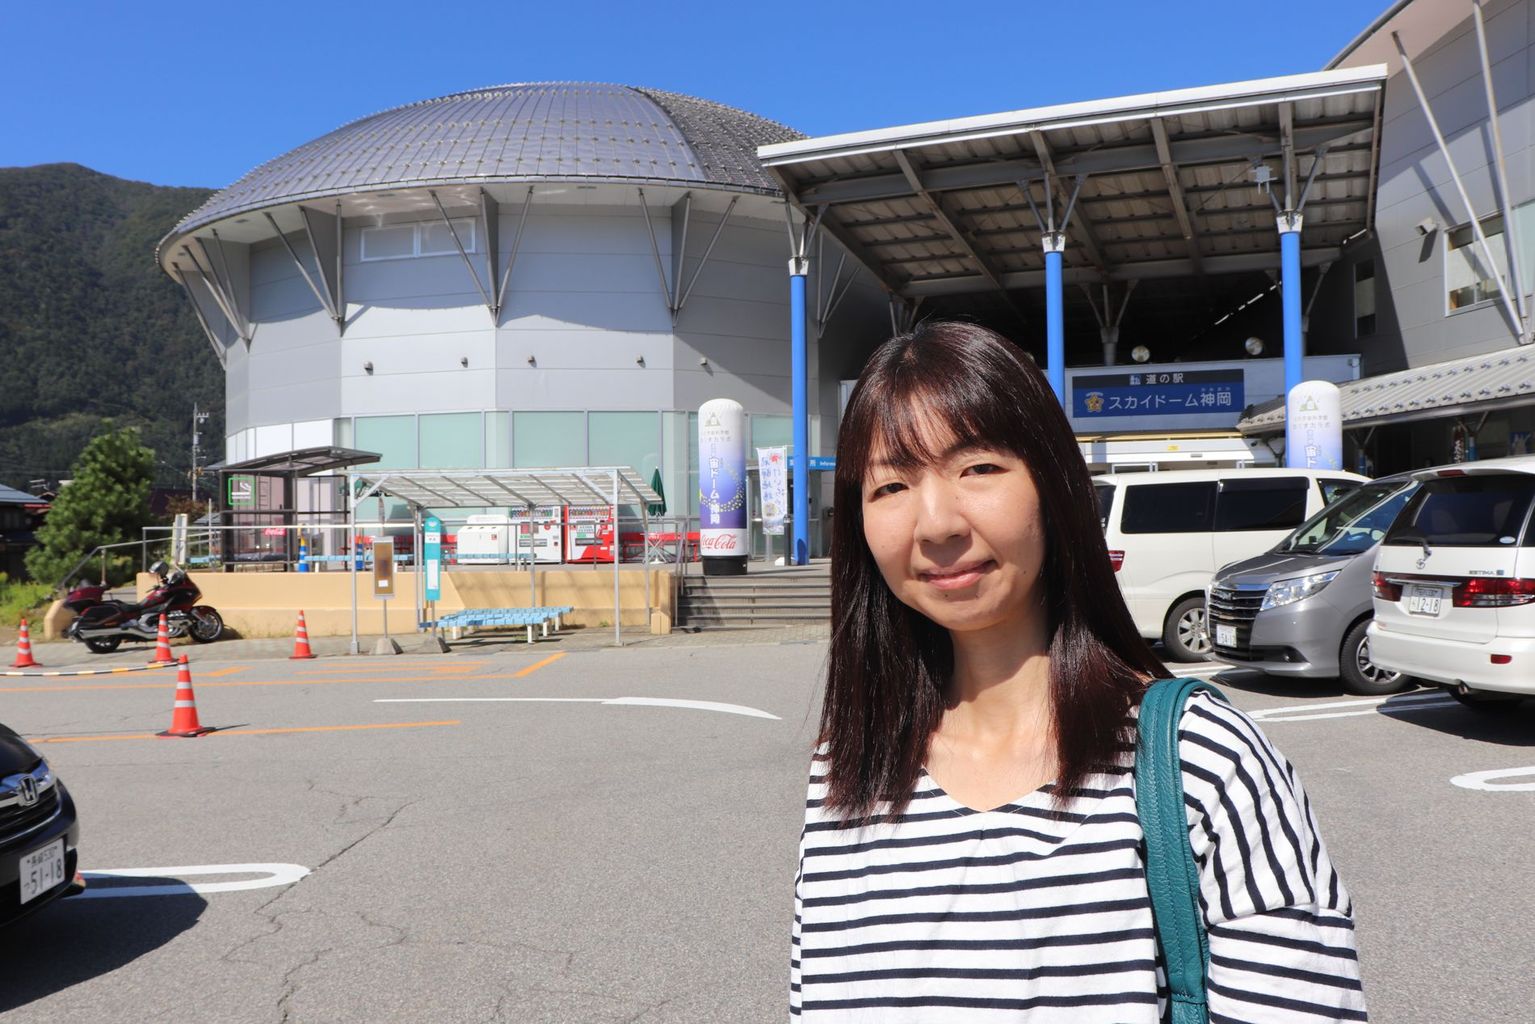 Dr. Yumiko Takenaga, PR officer of the Kamioka Observatory, and researchers around Kamioka collaborating with Hida-city have contributed to establishing the KamiokaLab Science Museum in Kamioka, which informs the general public about neutrino research. Photo: B. Vogel